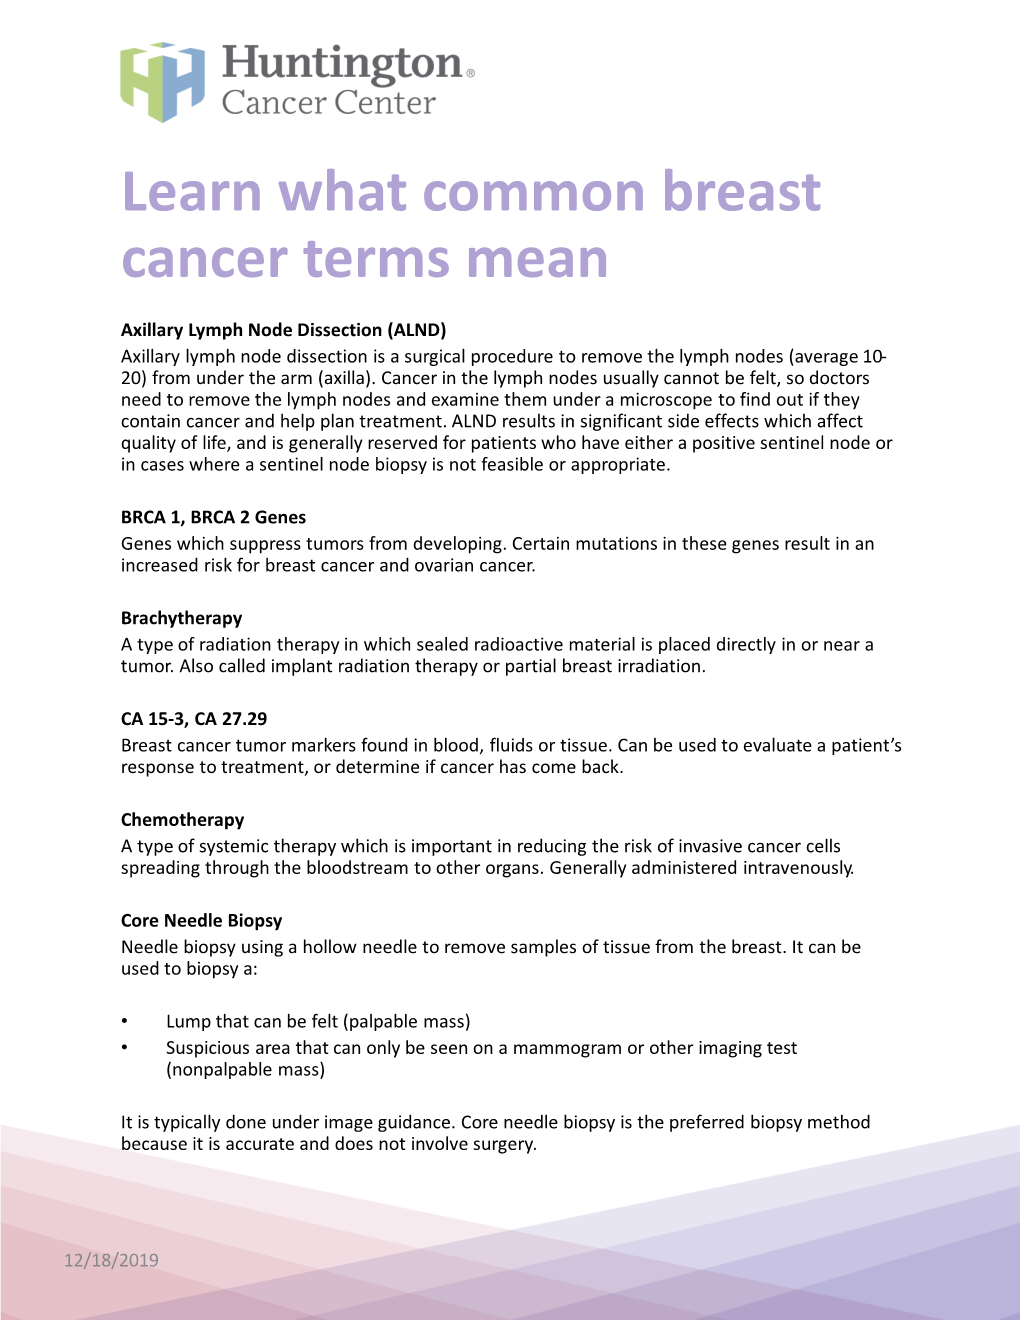 Breast Cancer Terms Explained